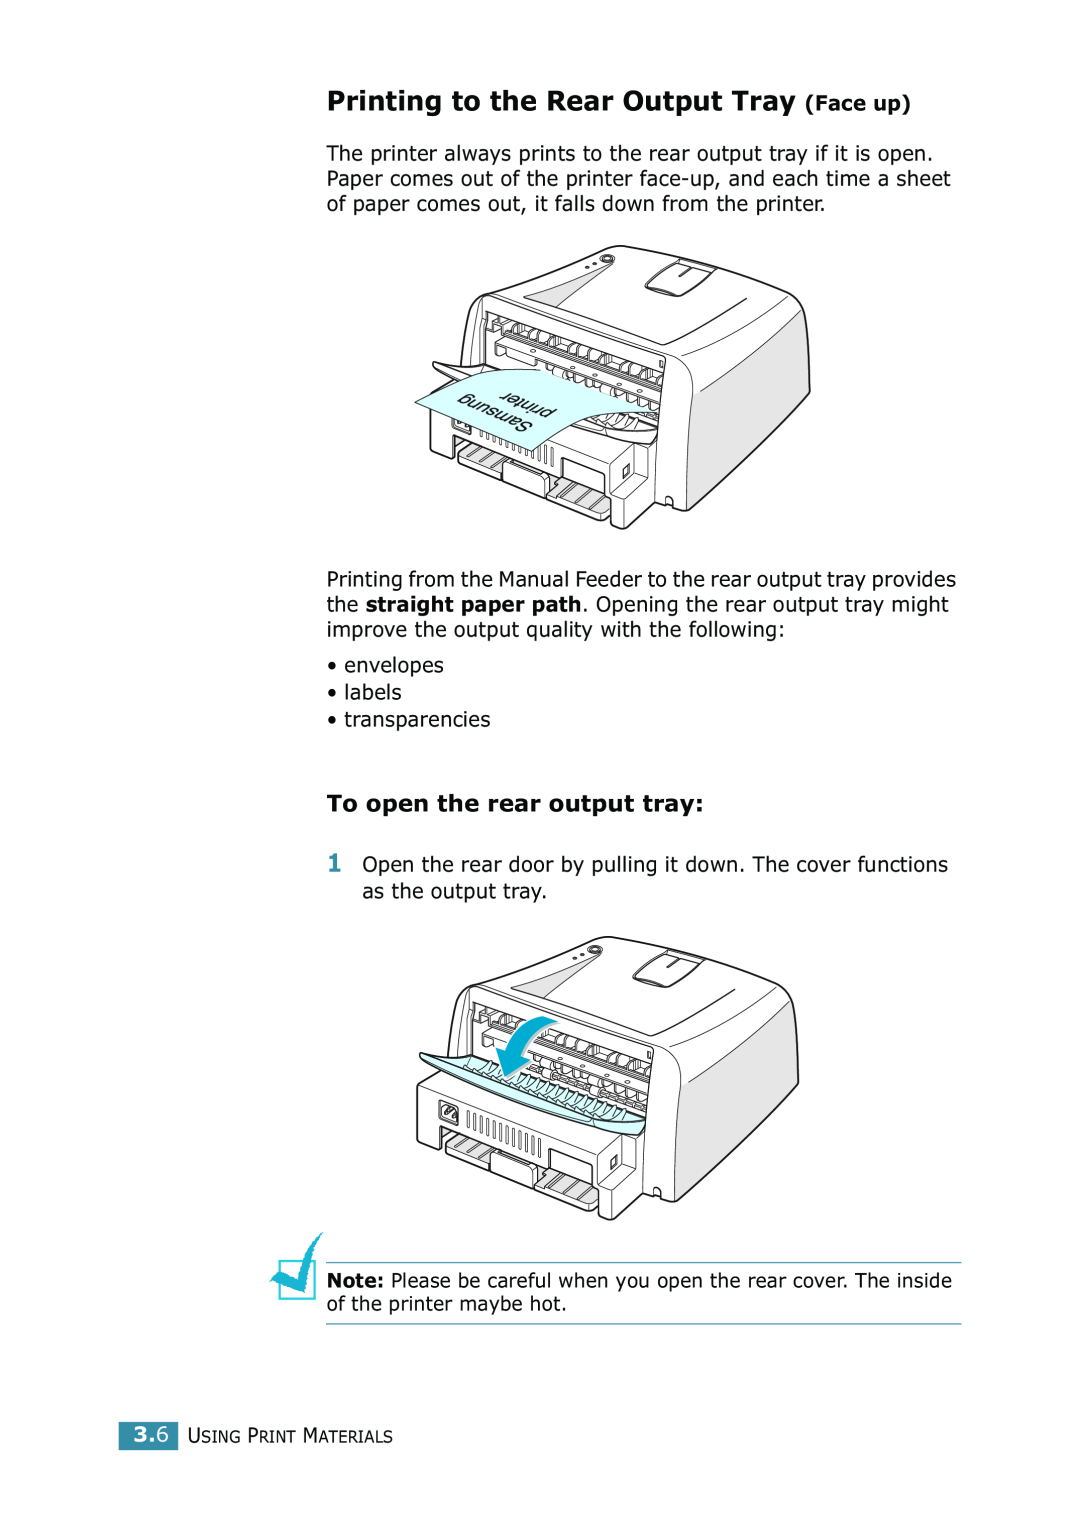 Samsung ML-1520 manual Printing to the Rear Output Tray Face up, To open the rear output tray 